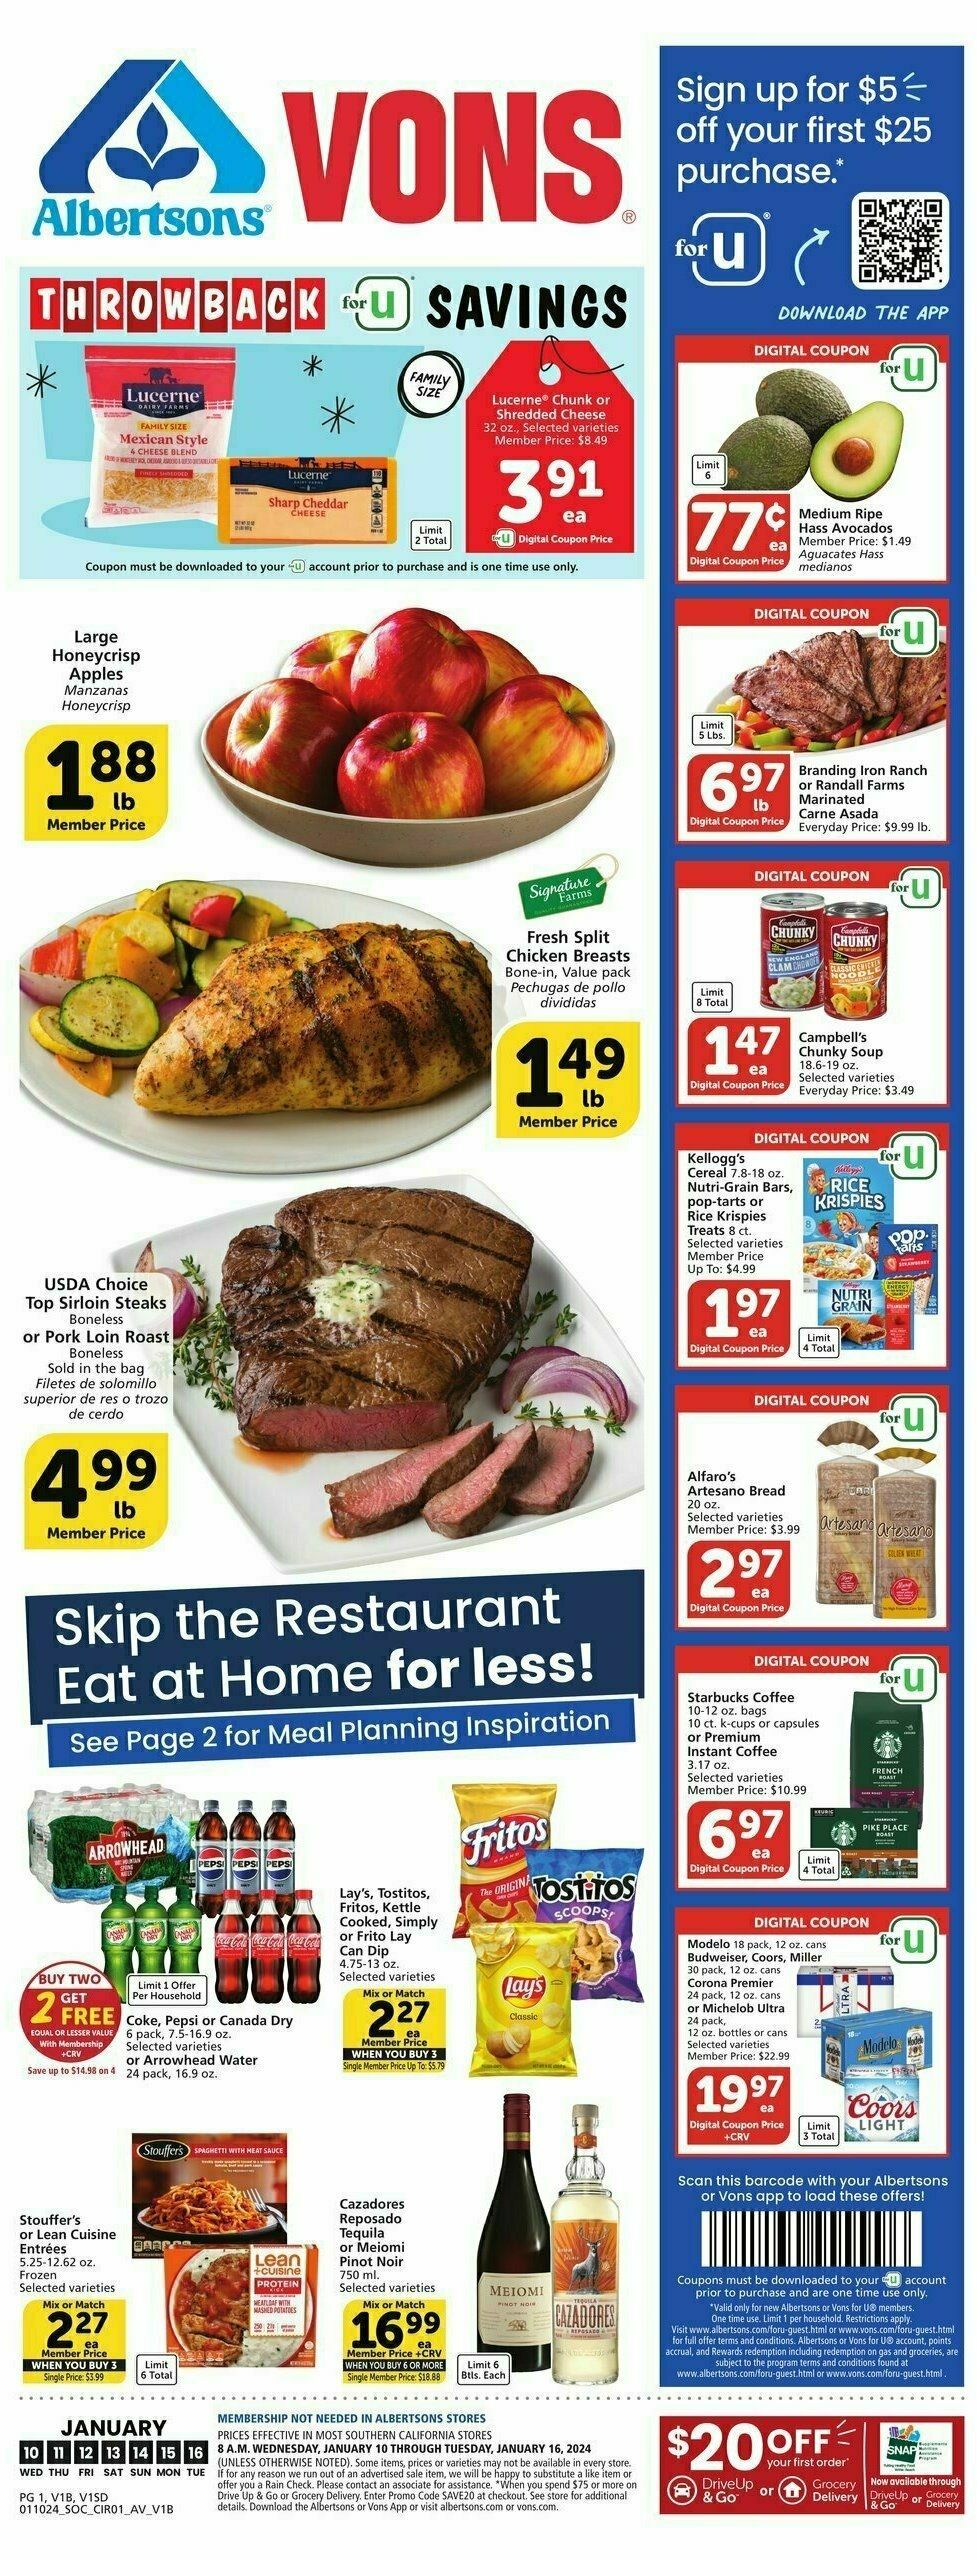 Vons Weekly Ad from January 10